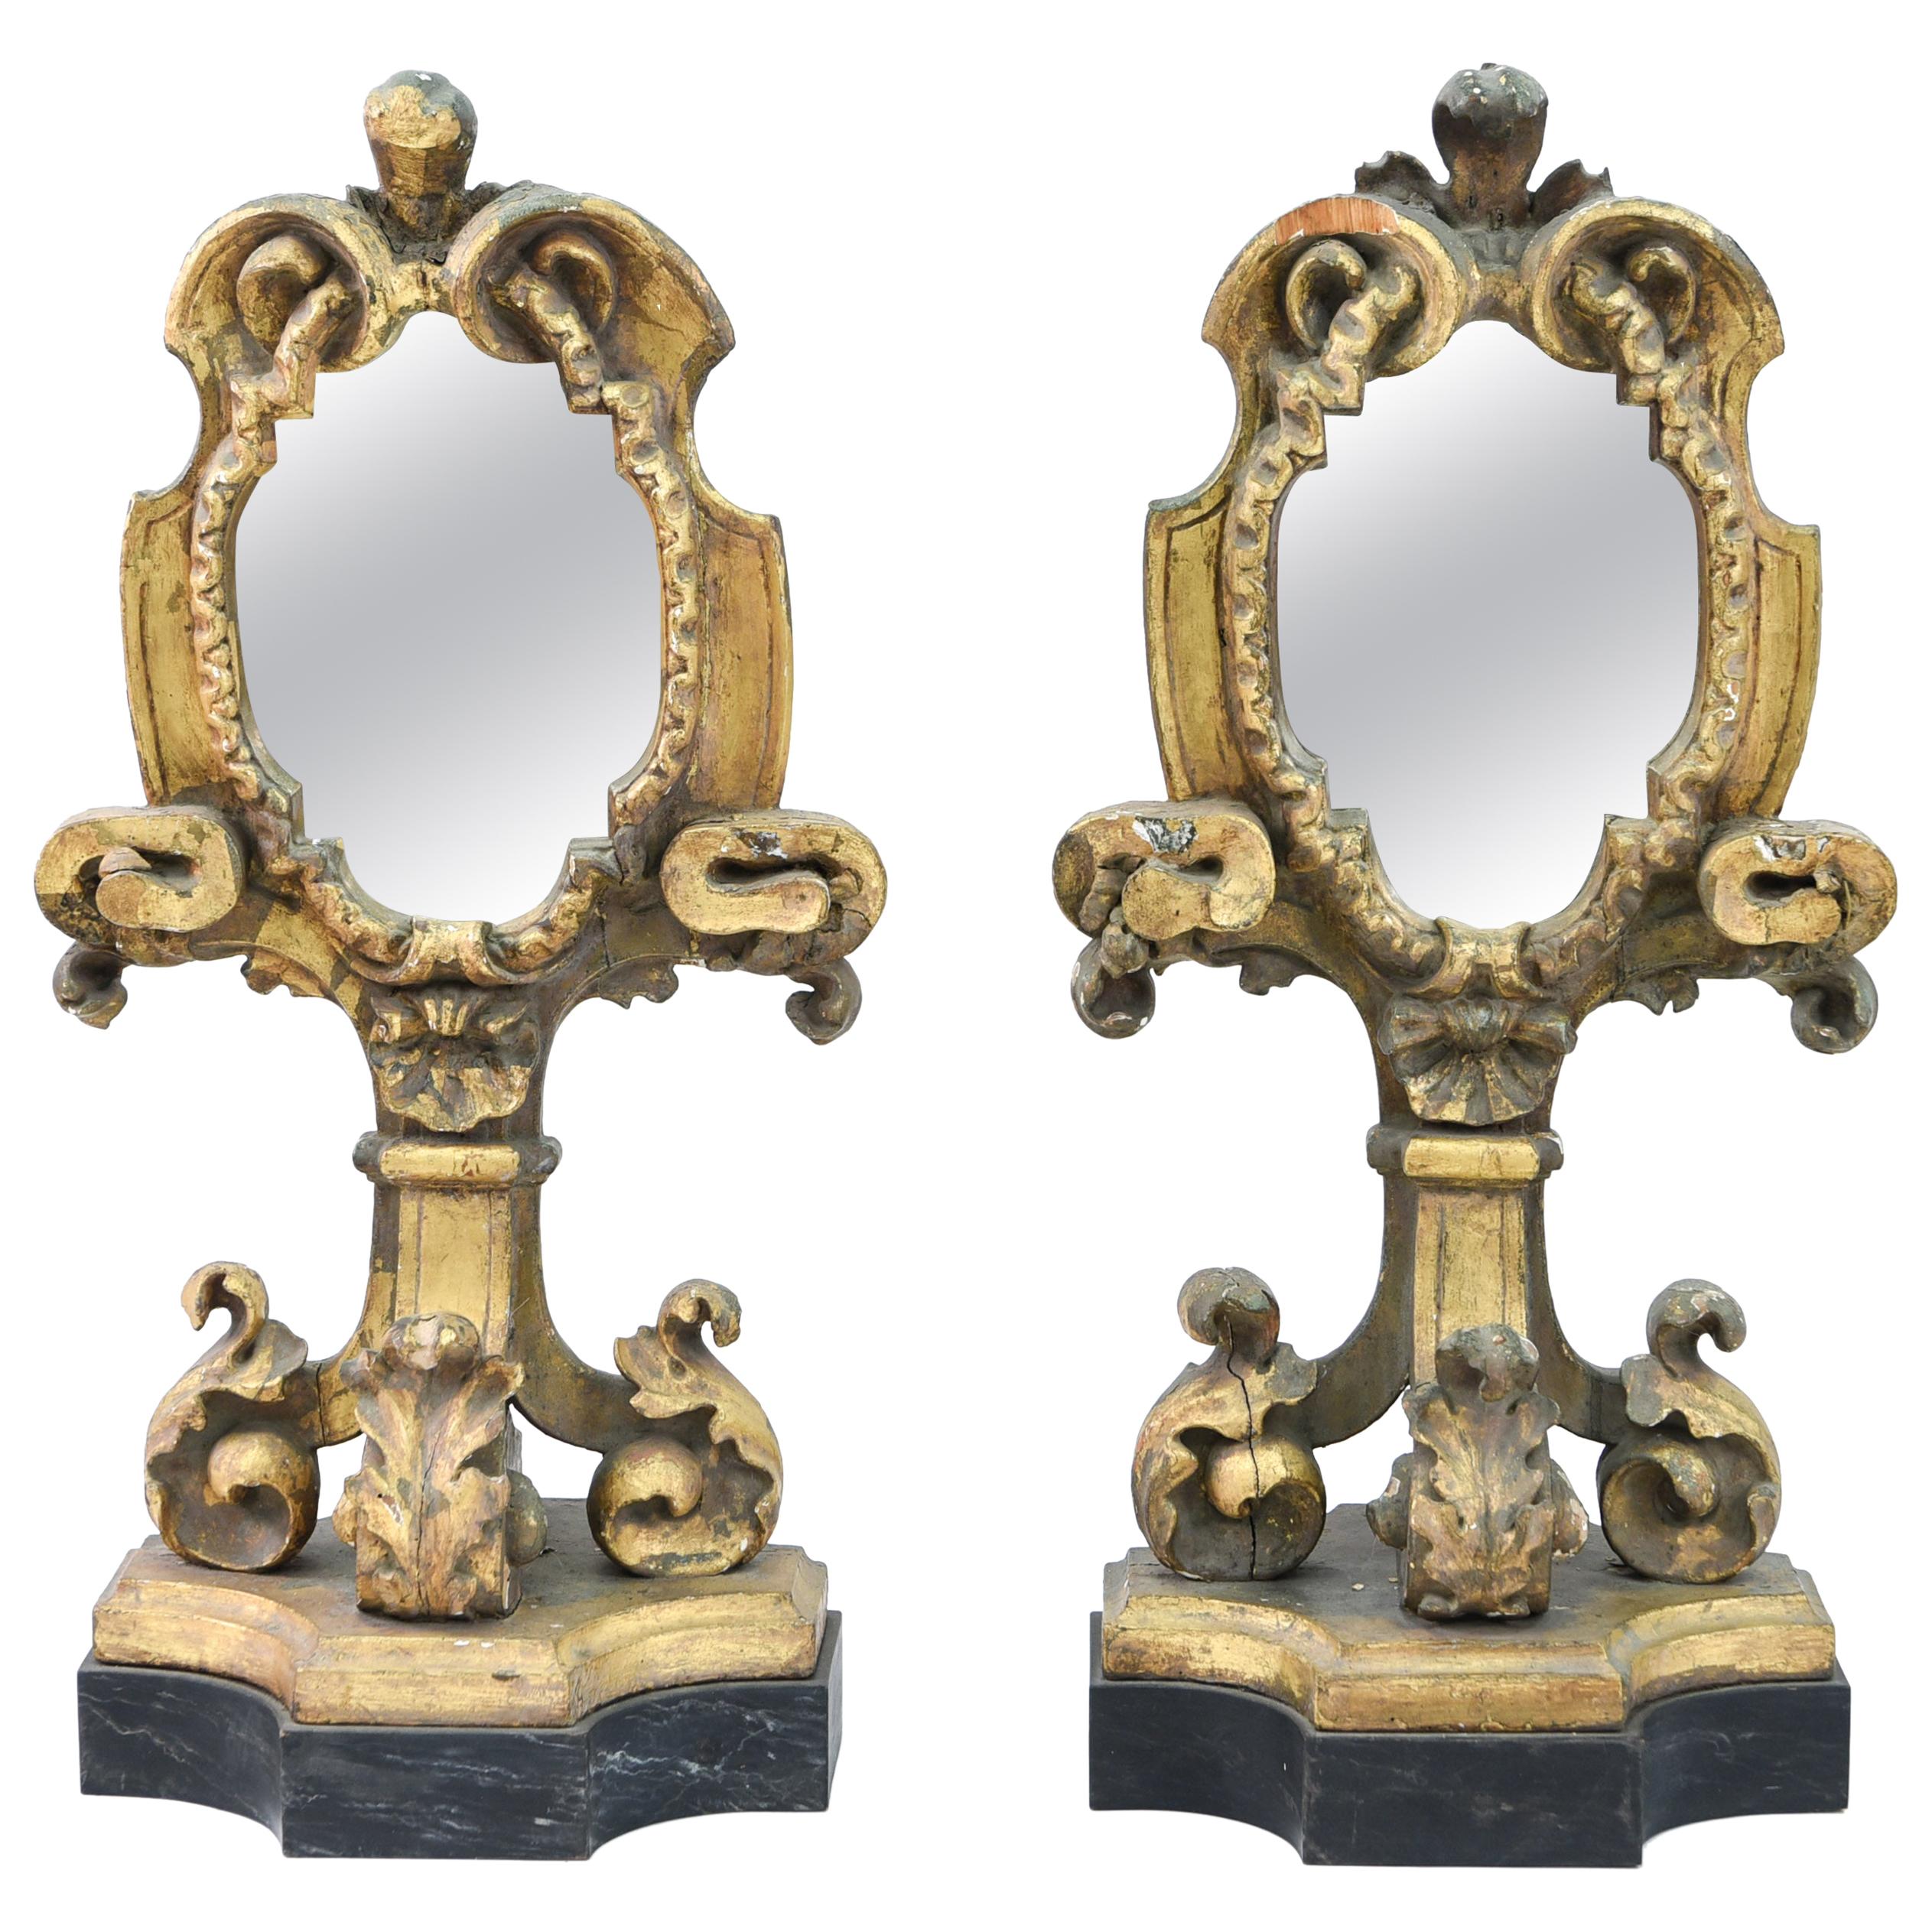 Pair of 19th Century Italian Appliqued Giltwood Architectural Pedestal Mirrors